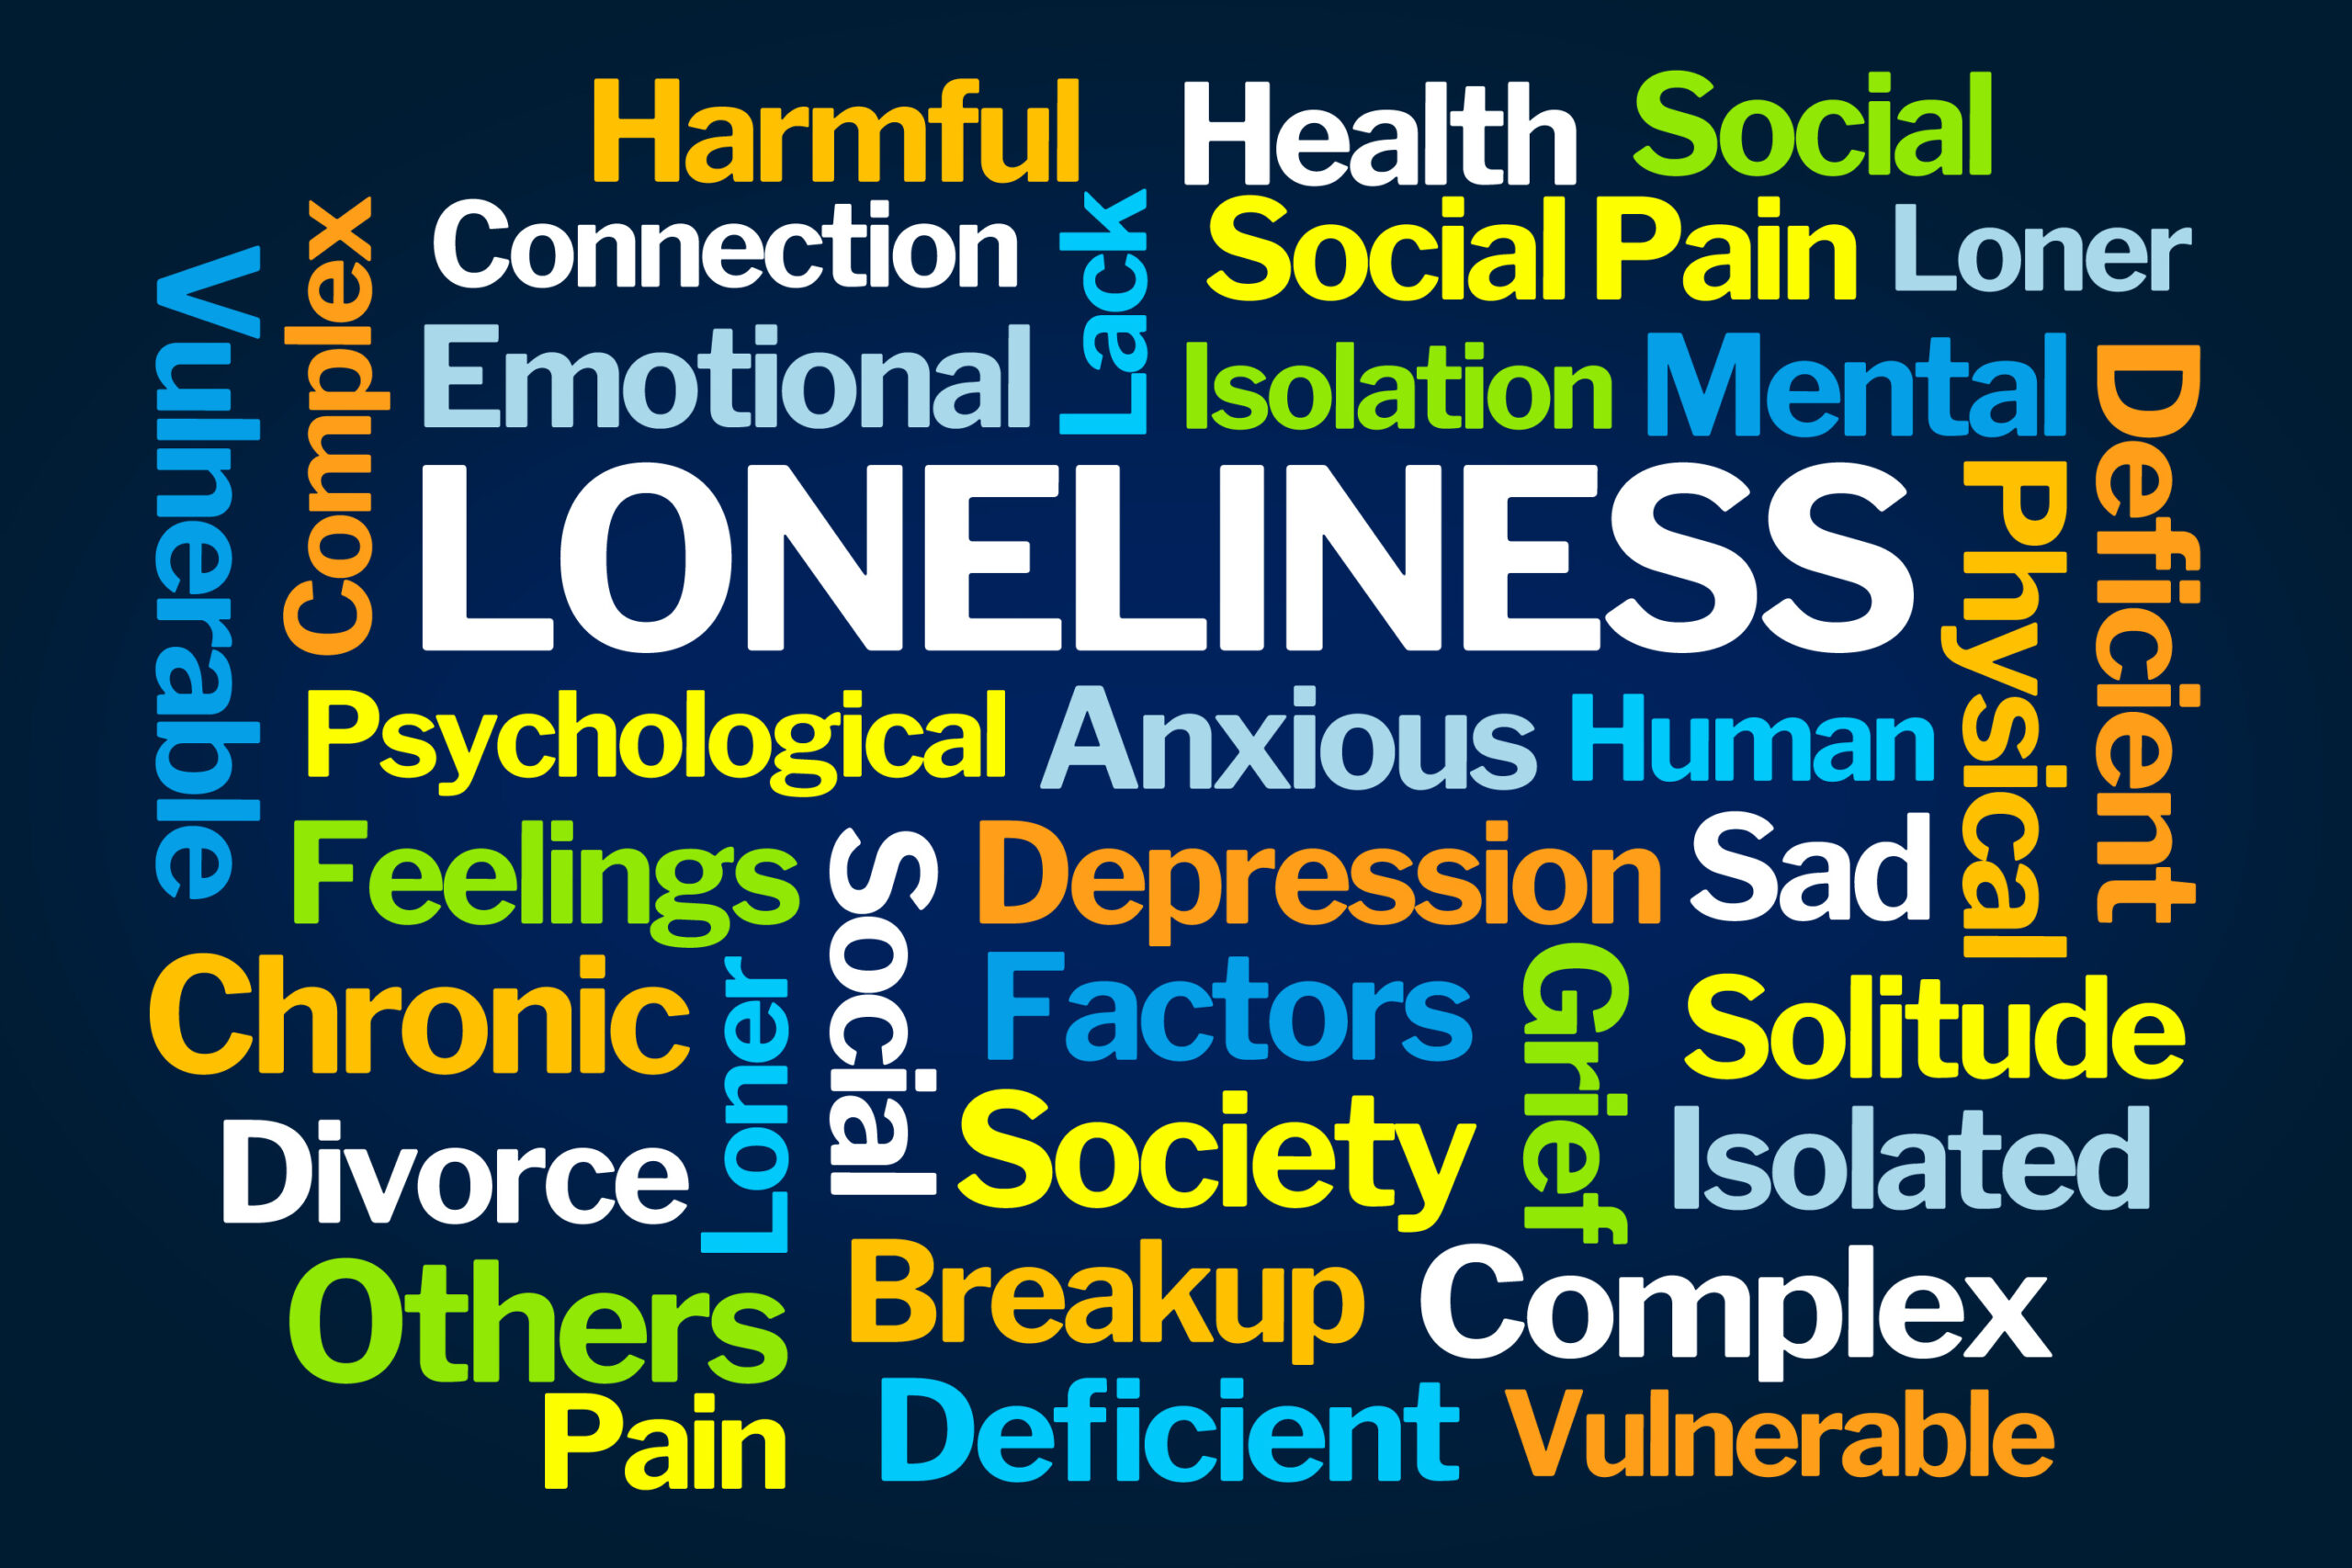 Loneliness May Be a Bigger Threat than Obesity